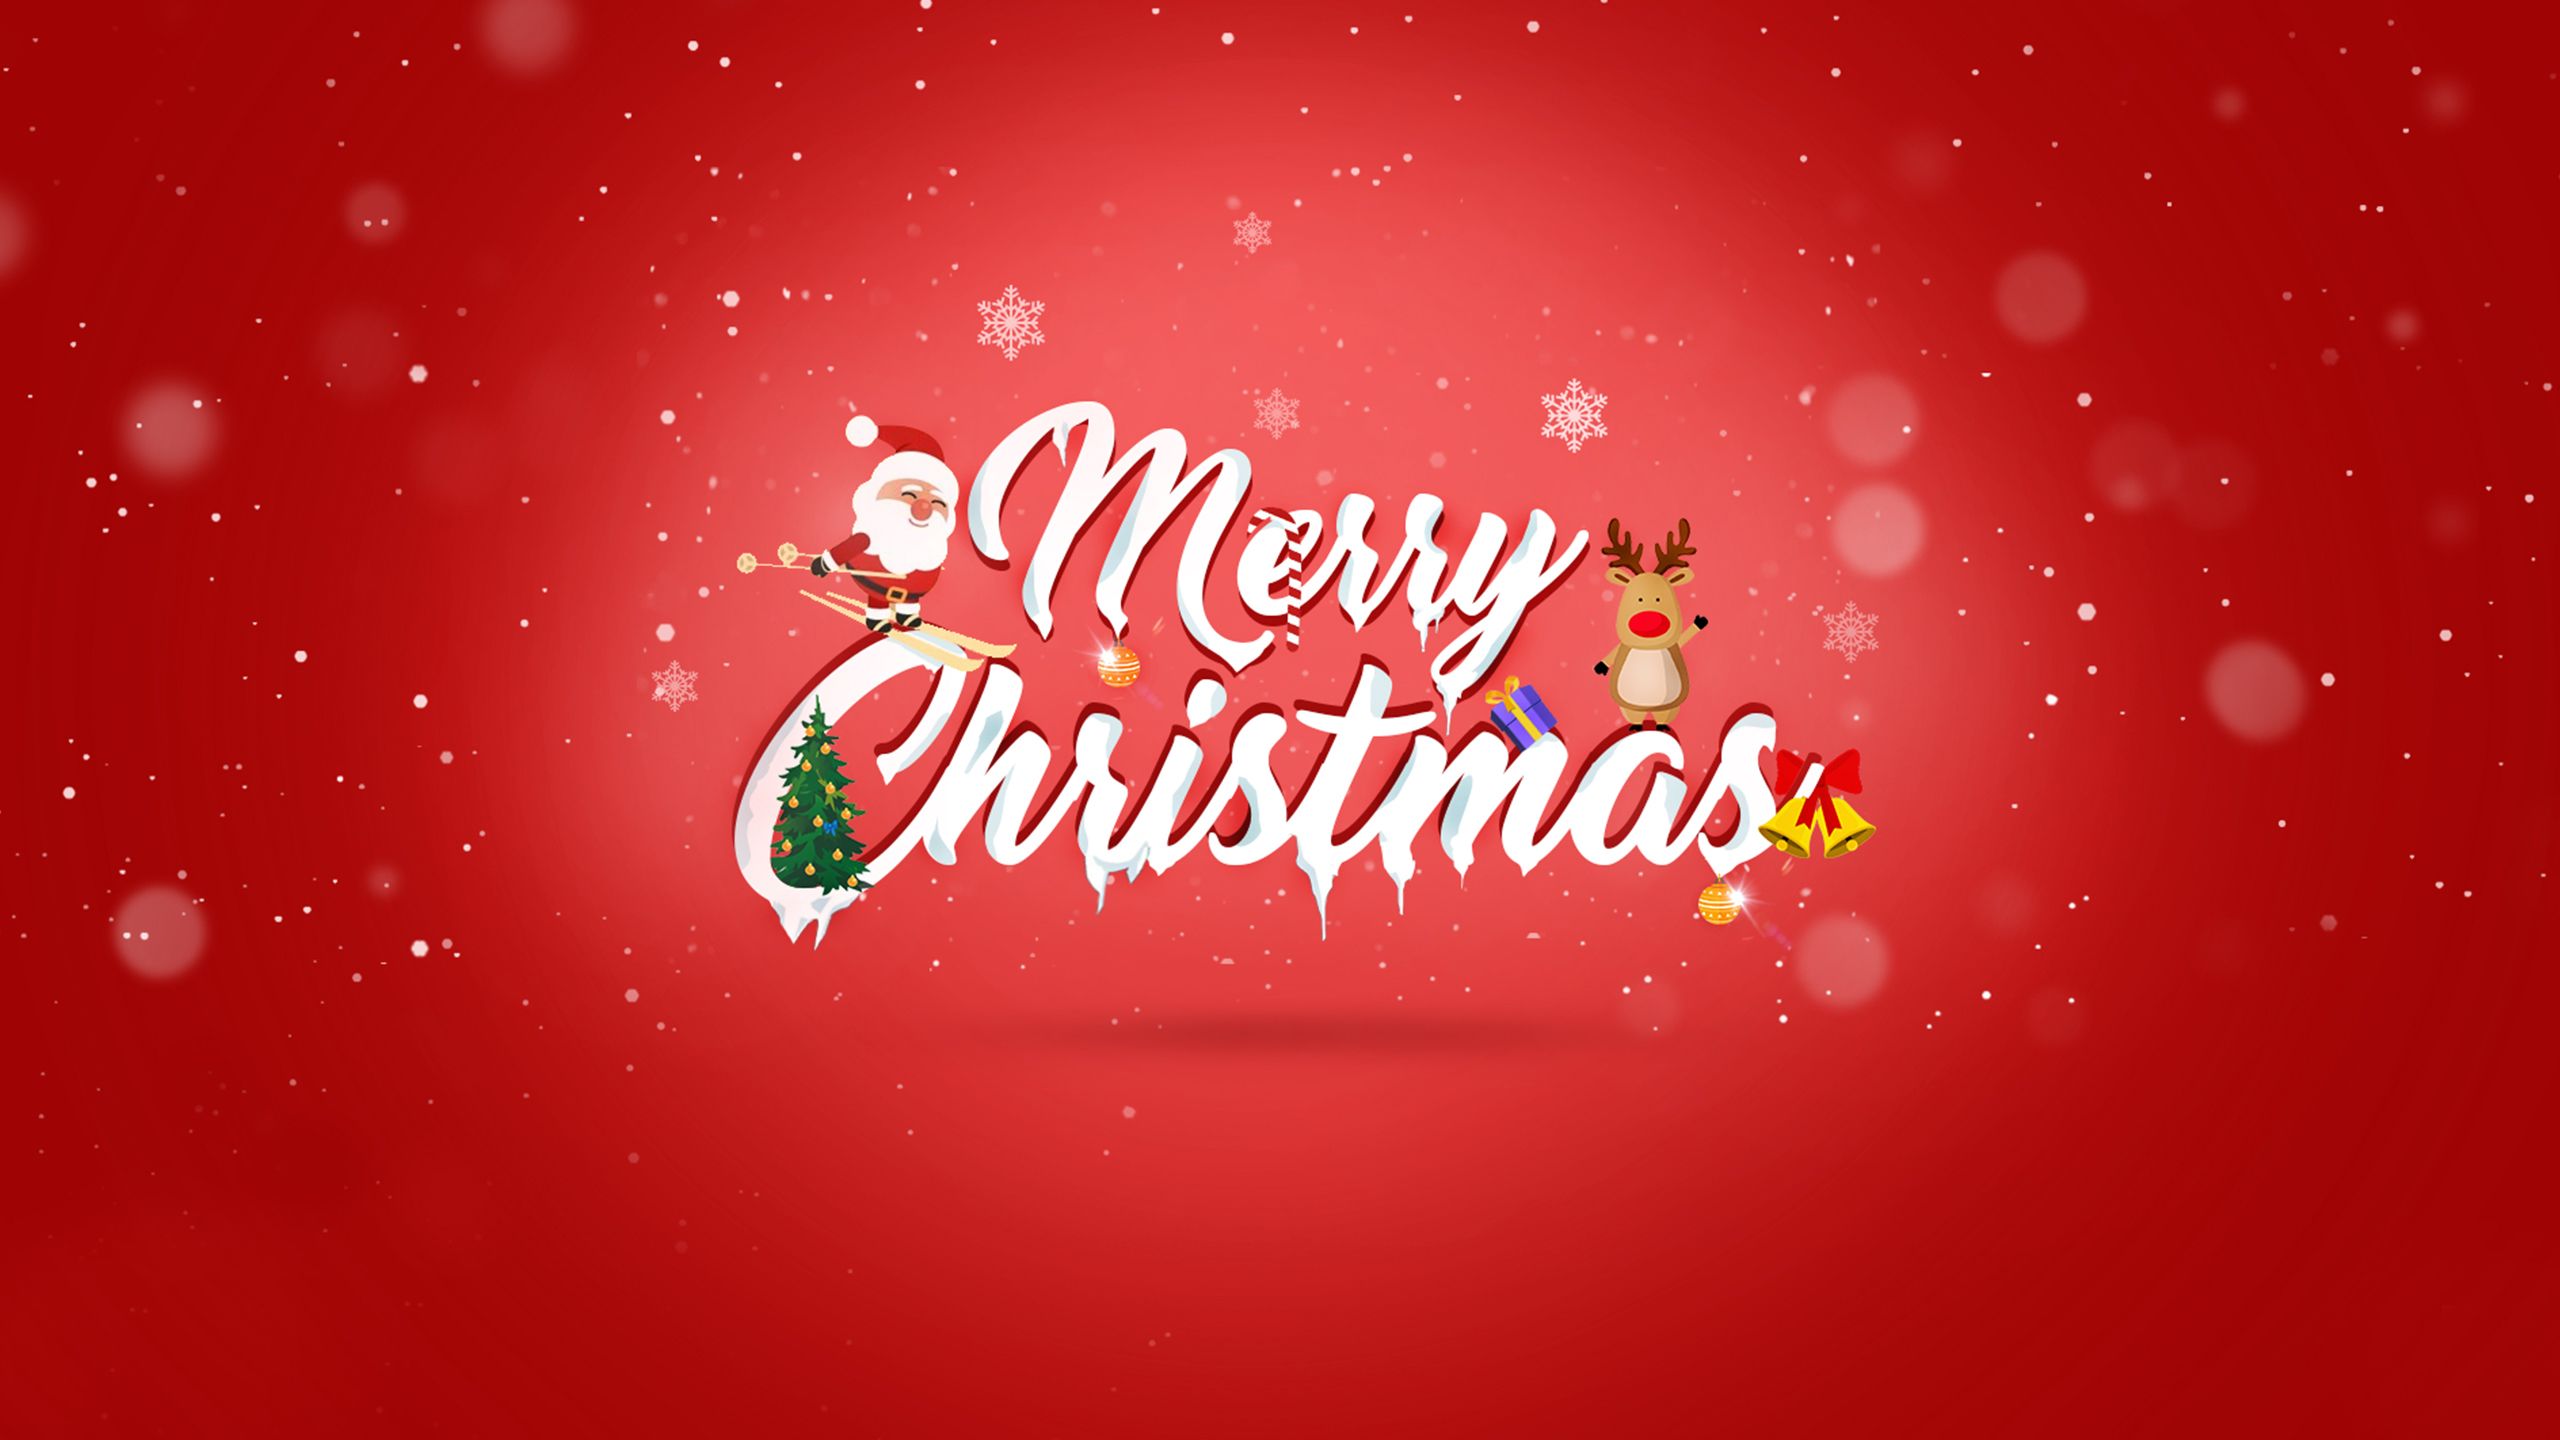 Merry Christmas 4K Wallpapers 4k, HD Merry Christmas 4K Backgrounds